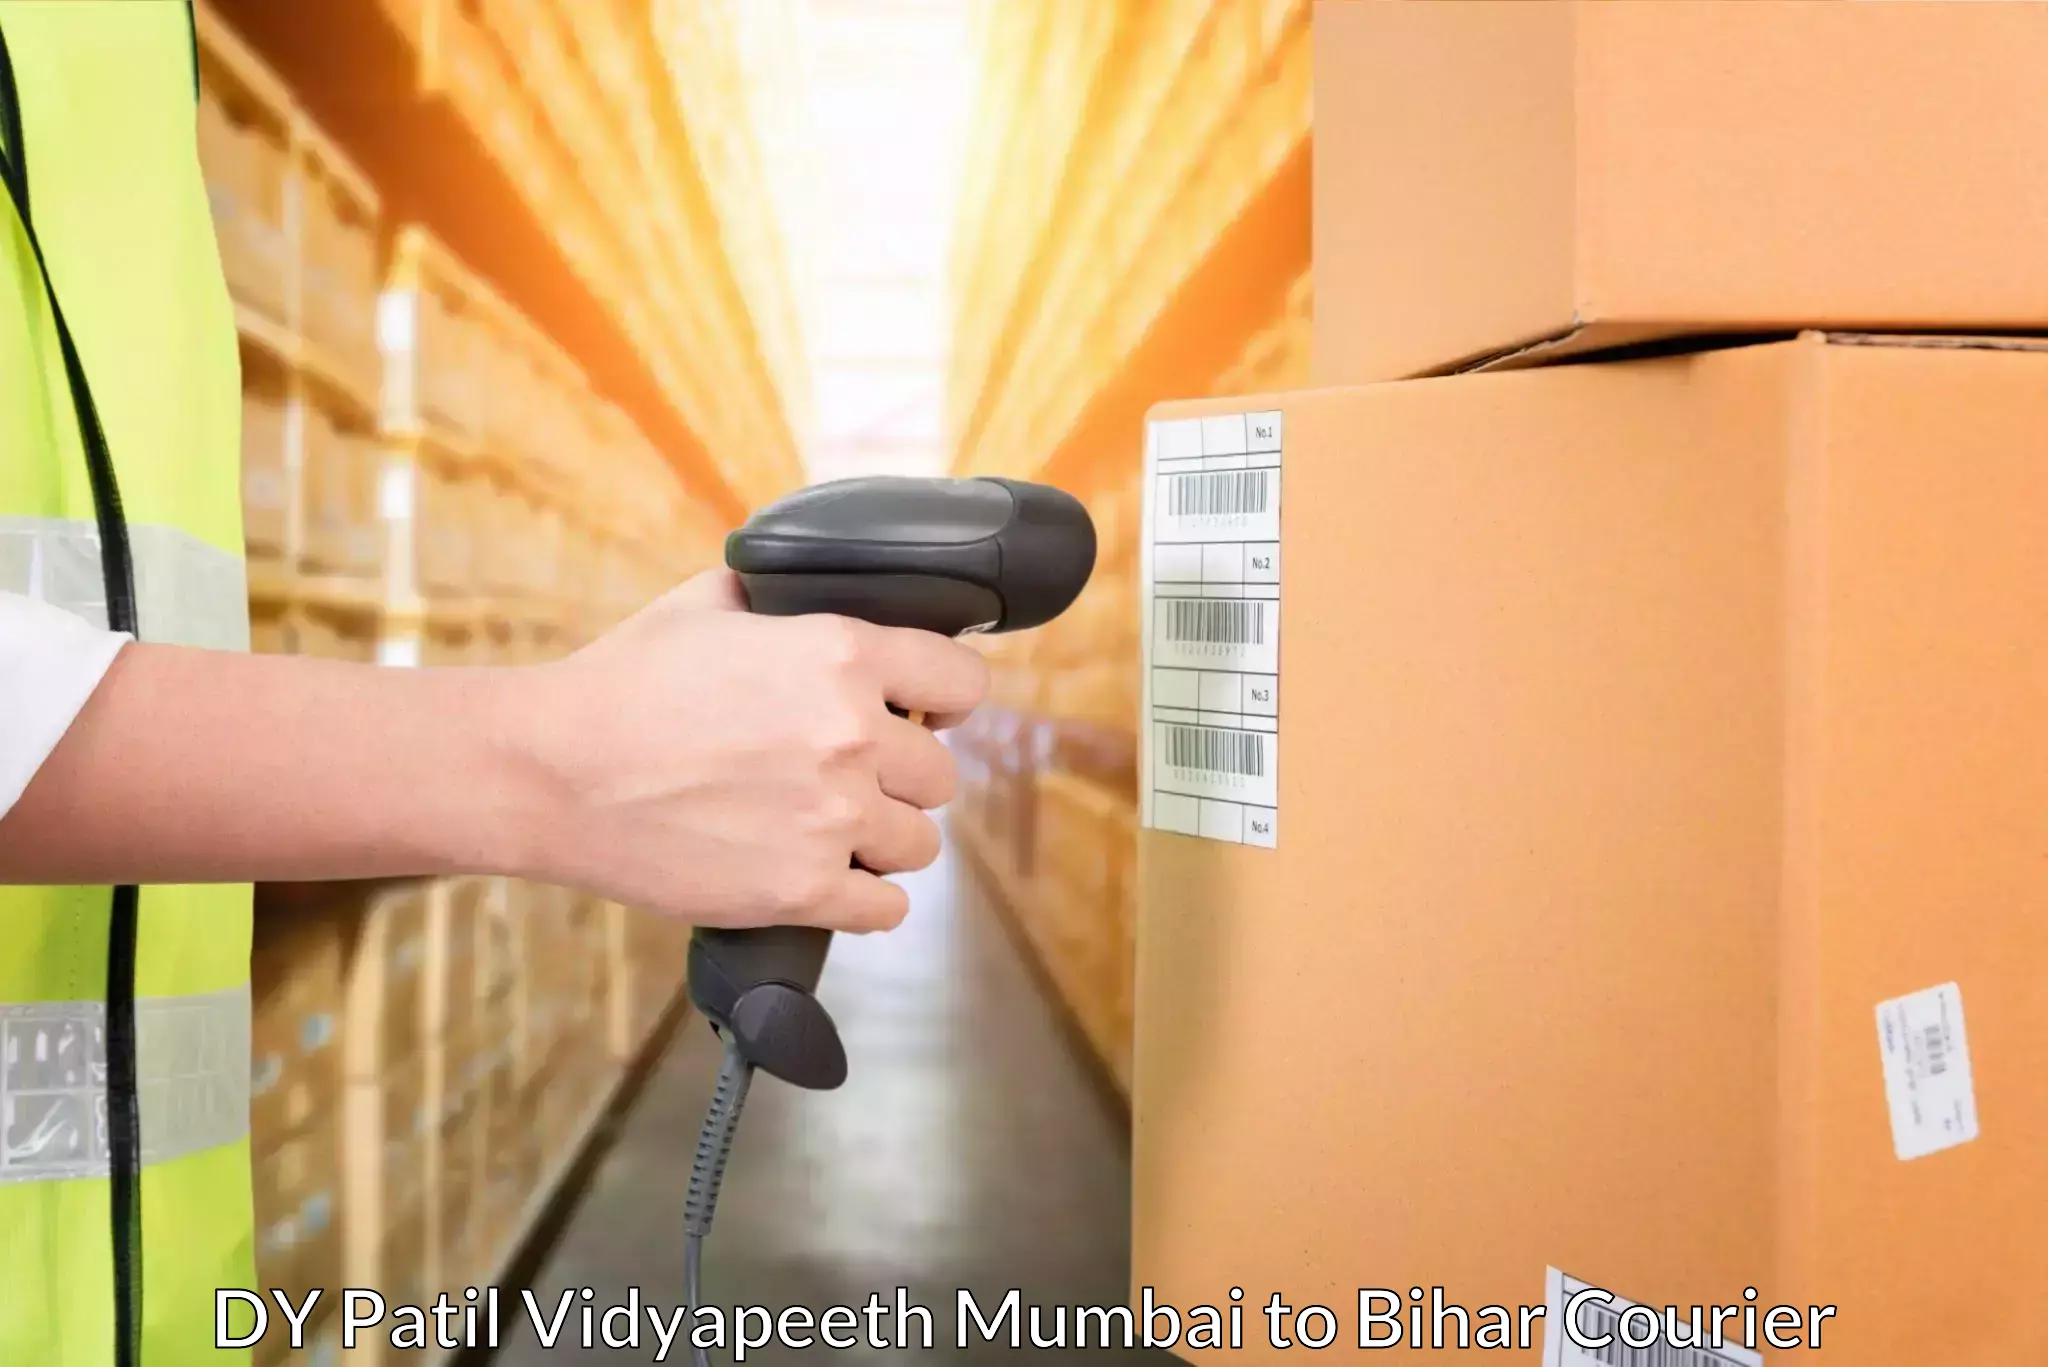 24/7 courier service in DY Patil Vidyapeeth Mumbai to Baisi